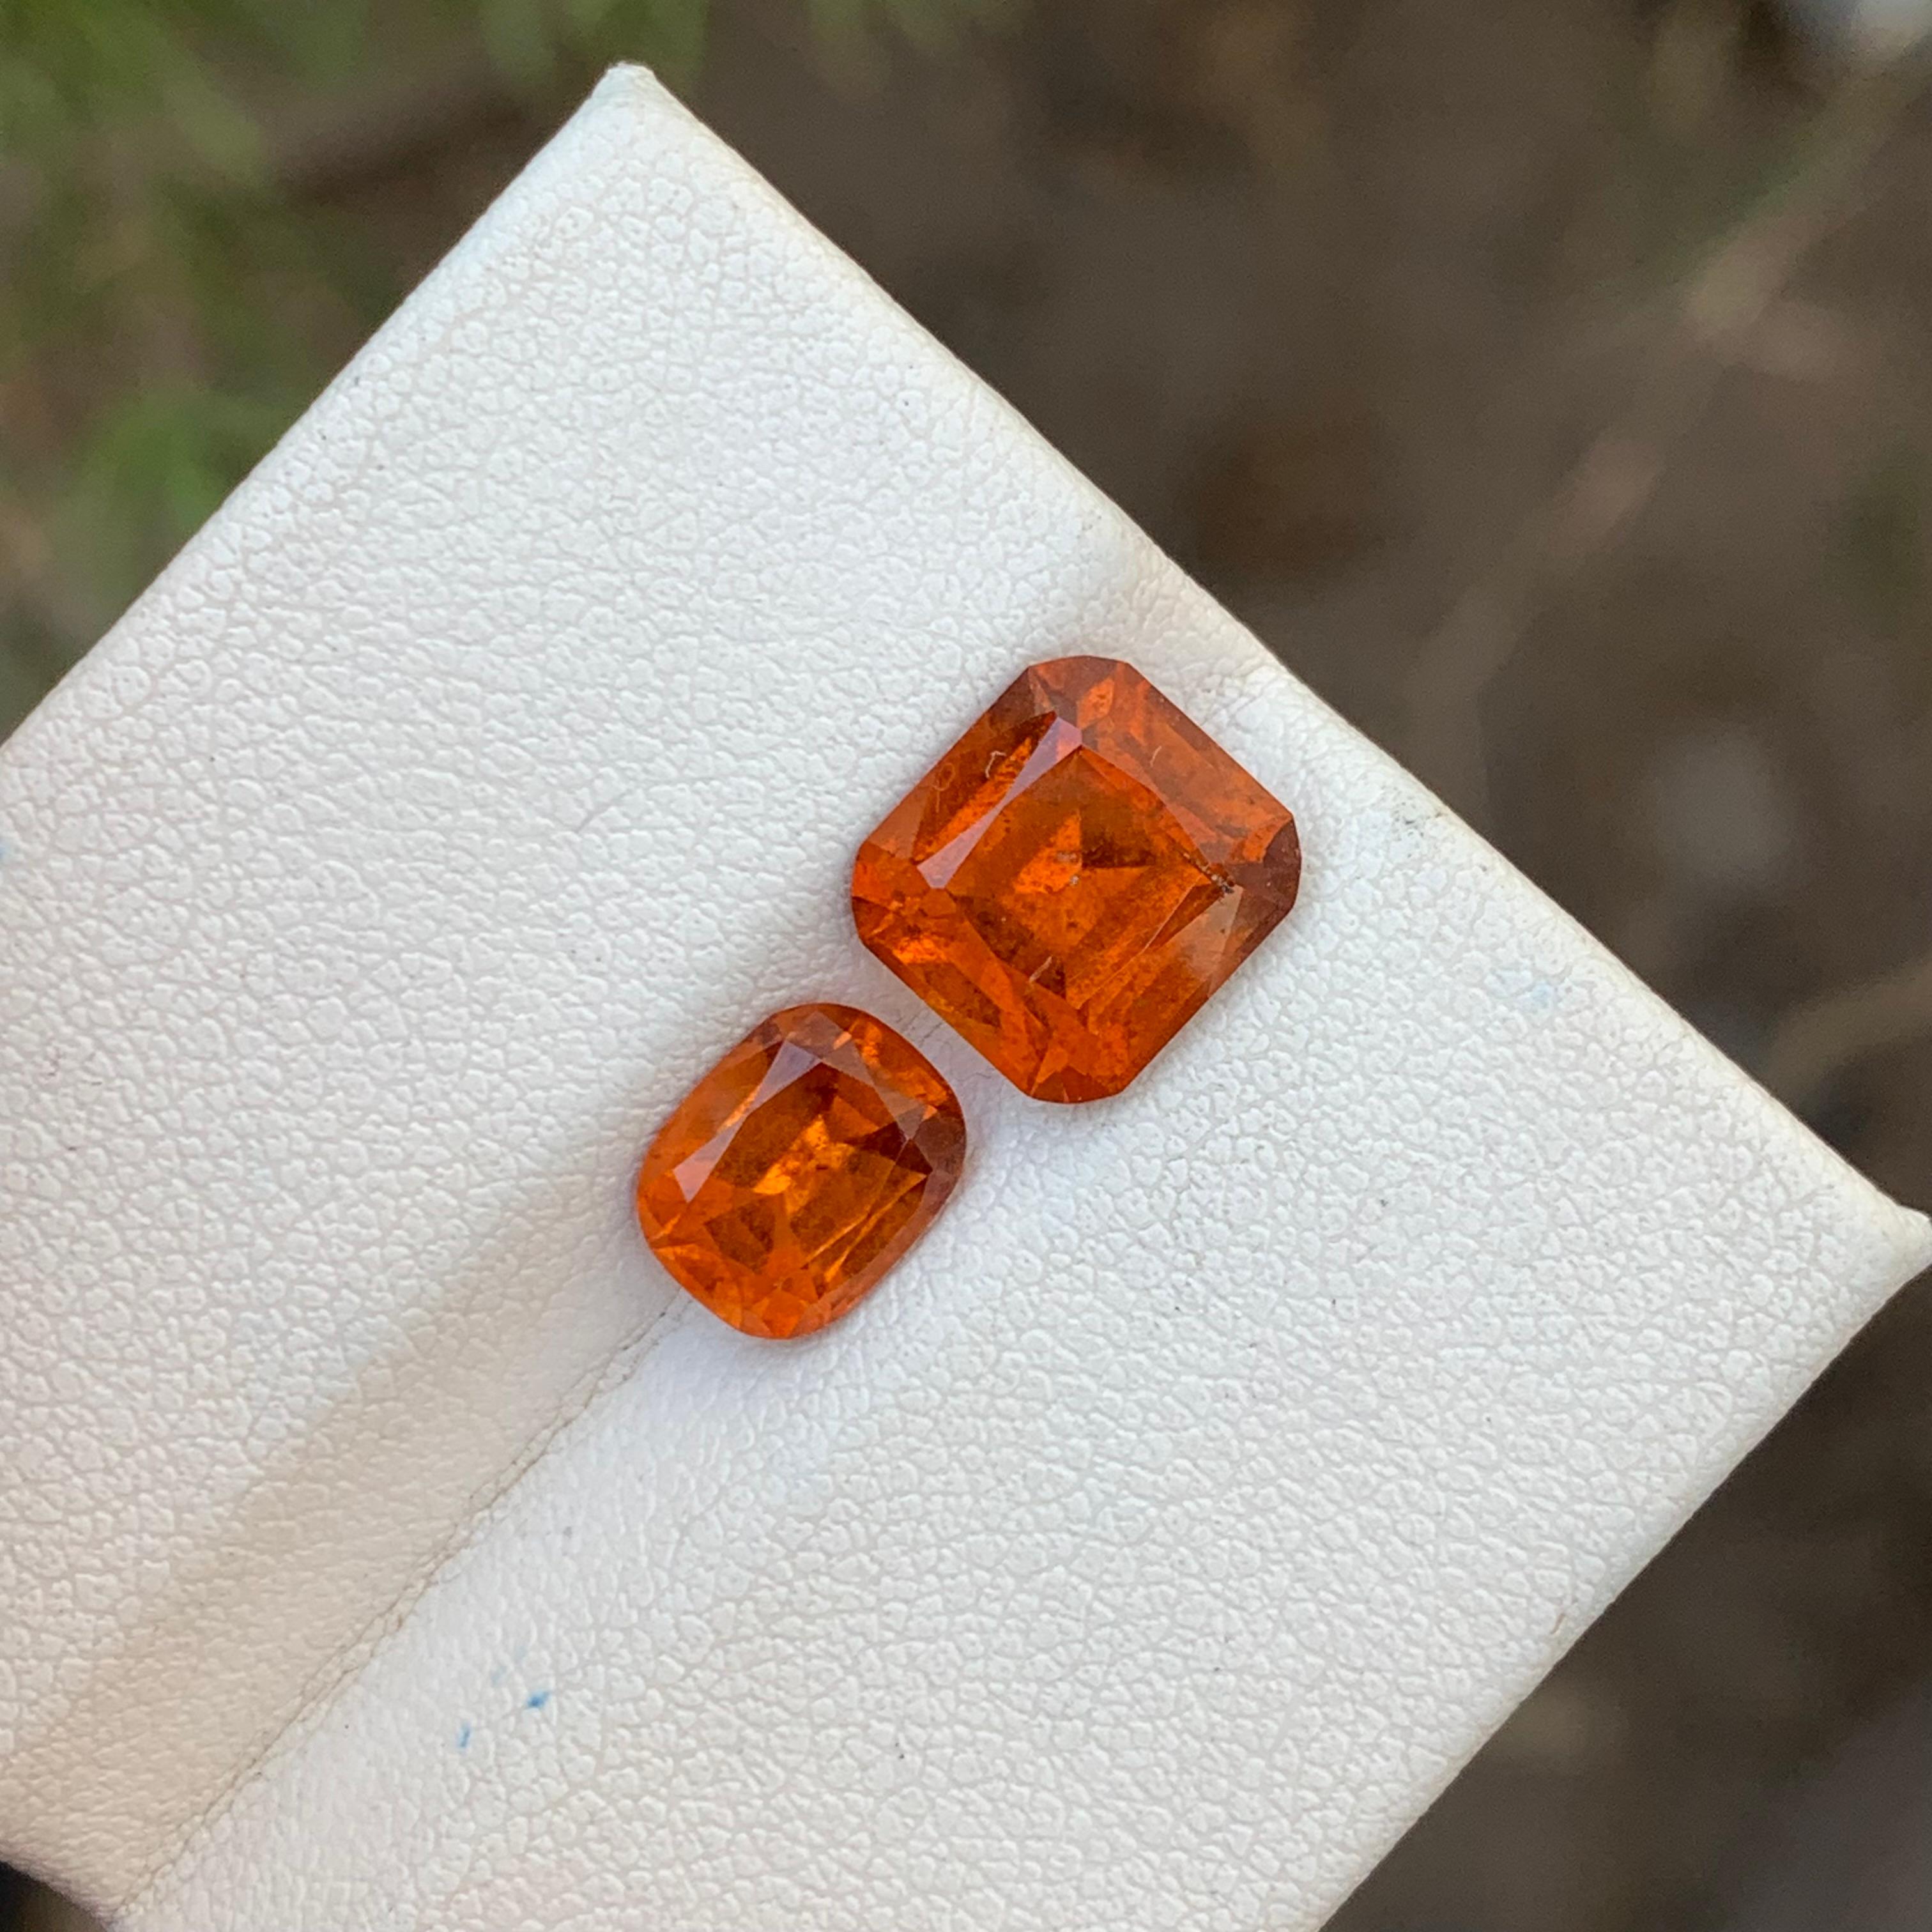 5.95 Carats Natural Loose Hessonite Garnet 2 Pieces For Ring Jewelry Making  en vente 10